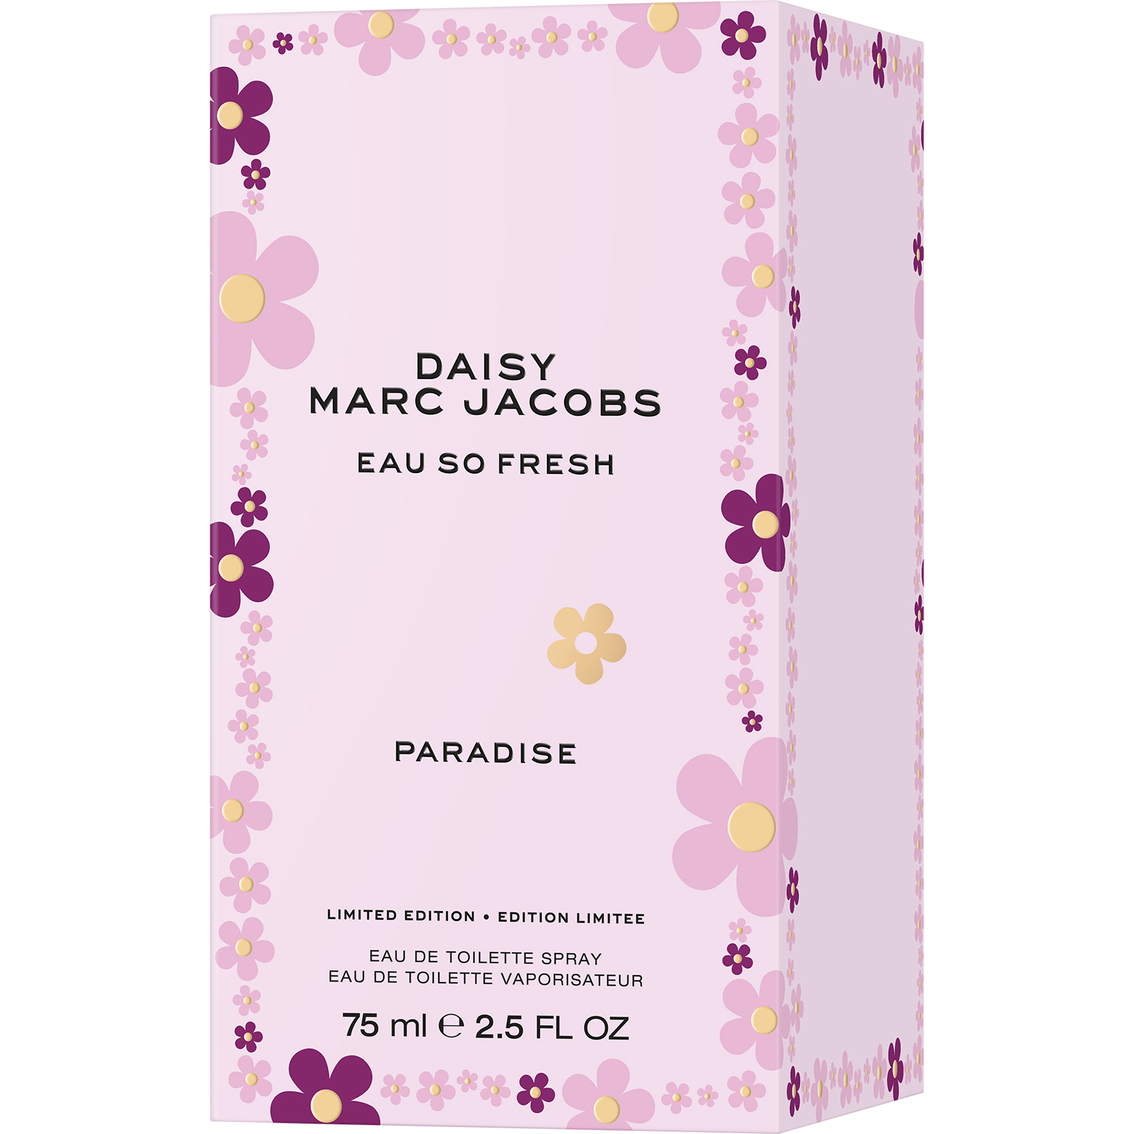 NEW MARC JACOBS DAISY PARADISE FRAGRANCE REVIEW. #fragrance